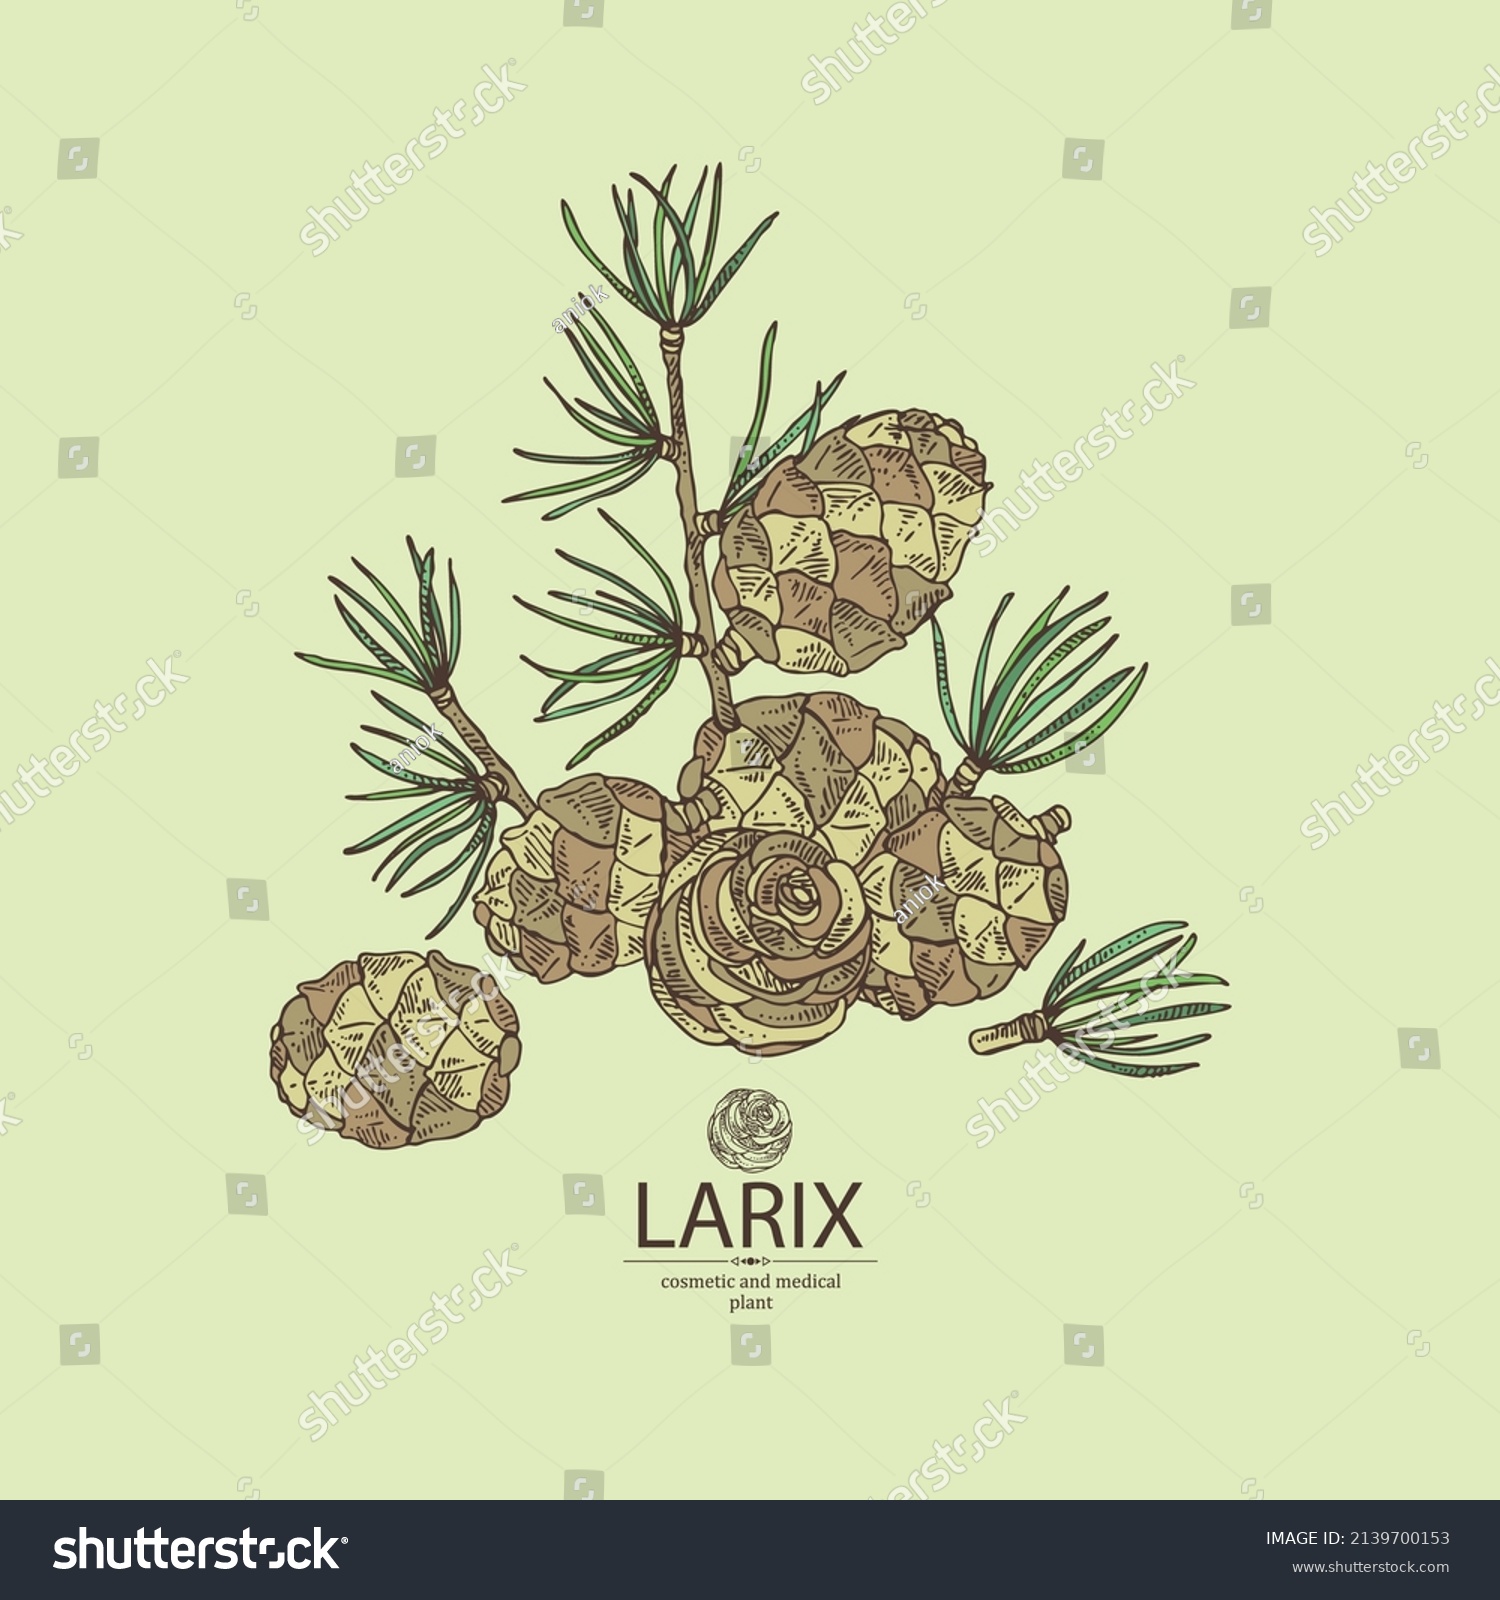 Background with larix: larch tree, larix branch and larch cone. Cosmetics and medical plant. Vector hand drawn illustration. #2139700153